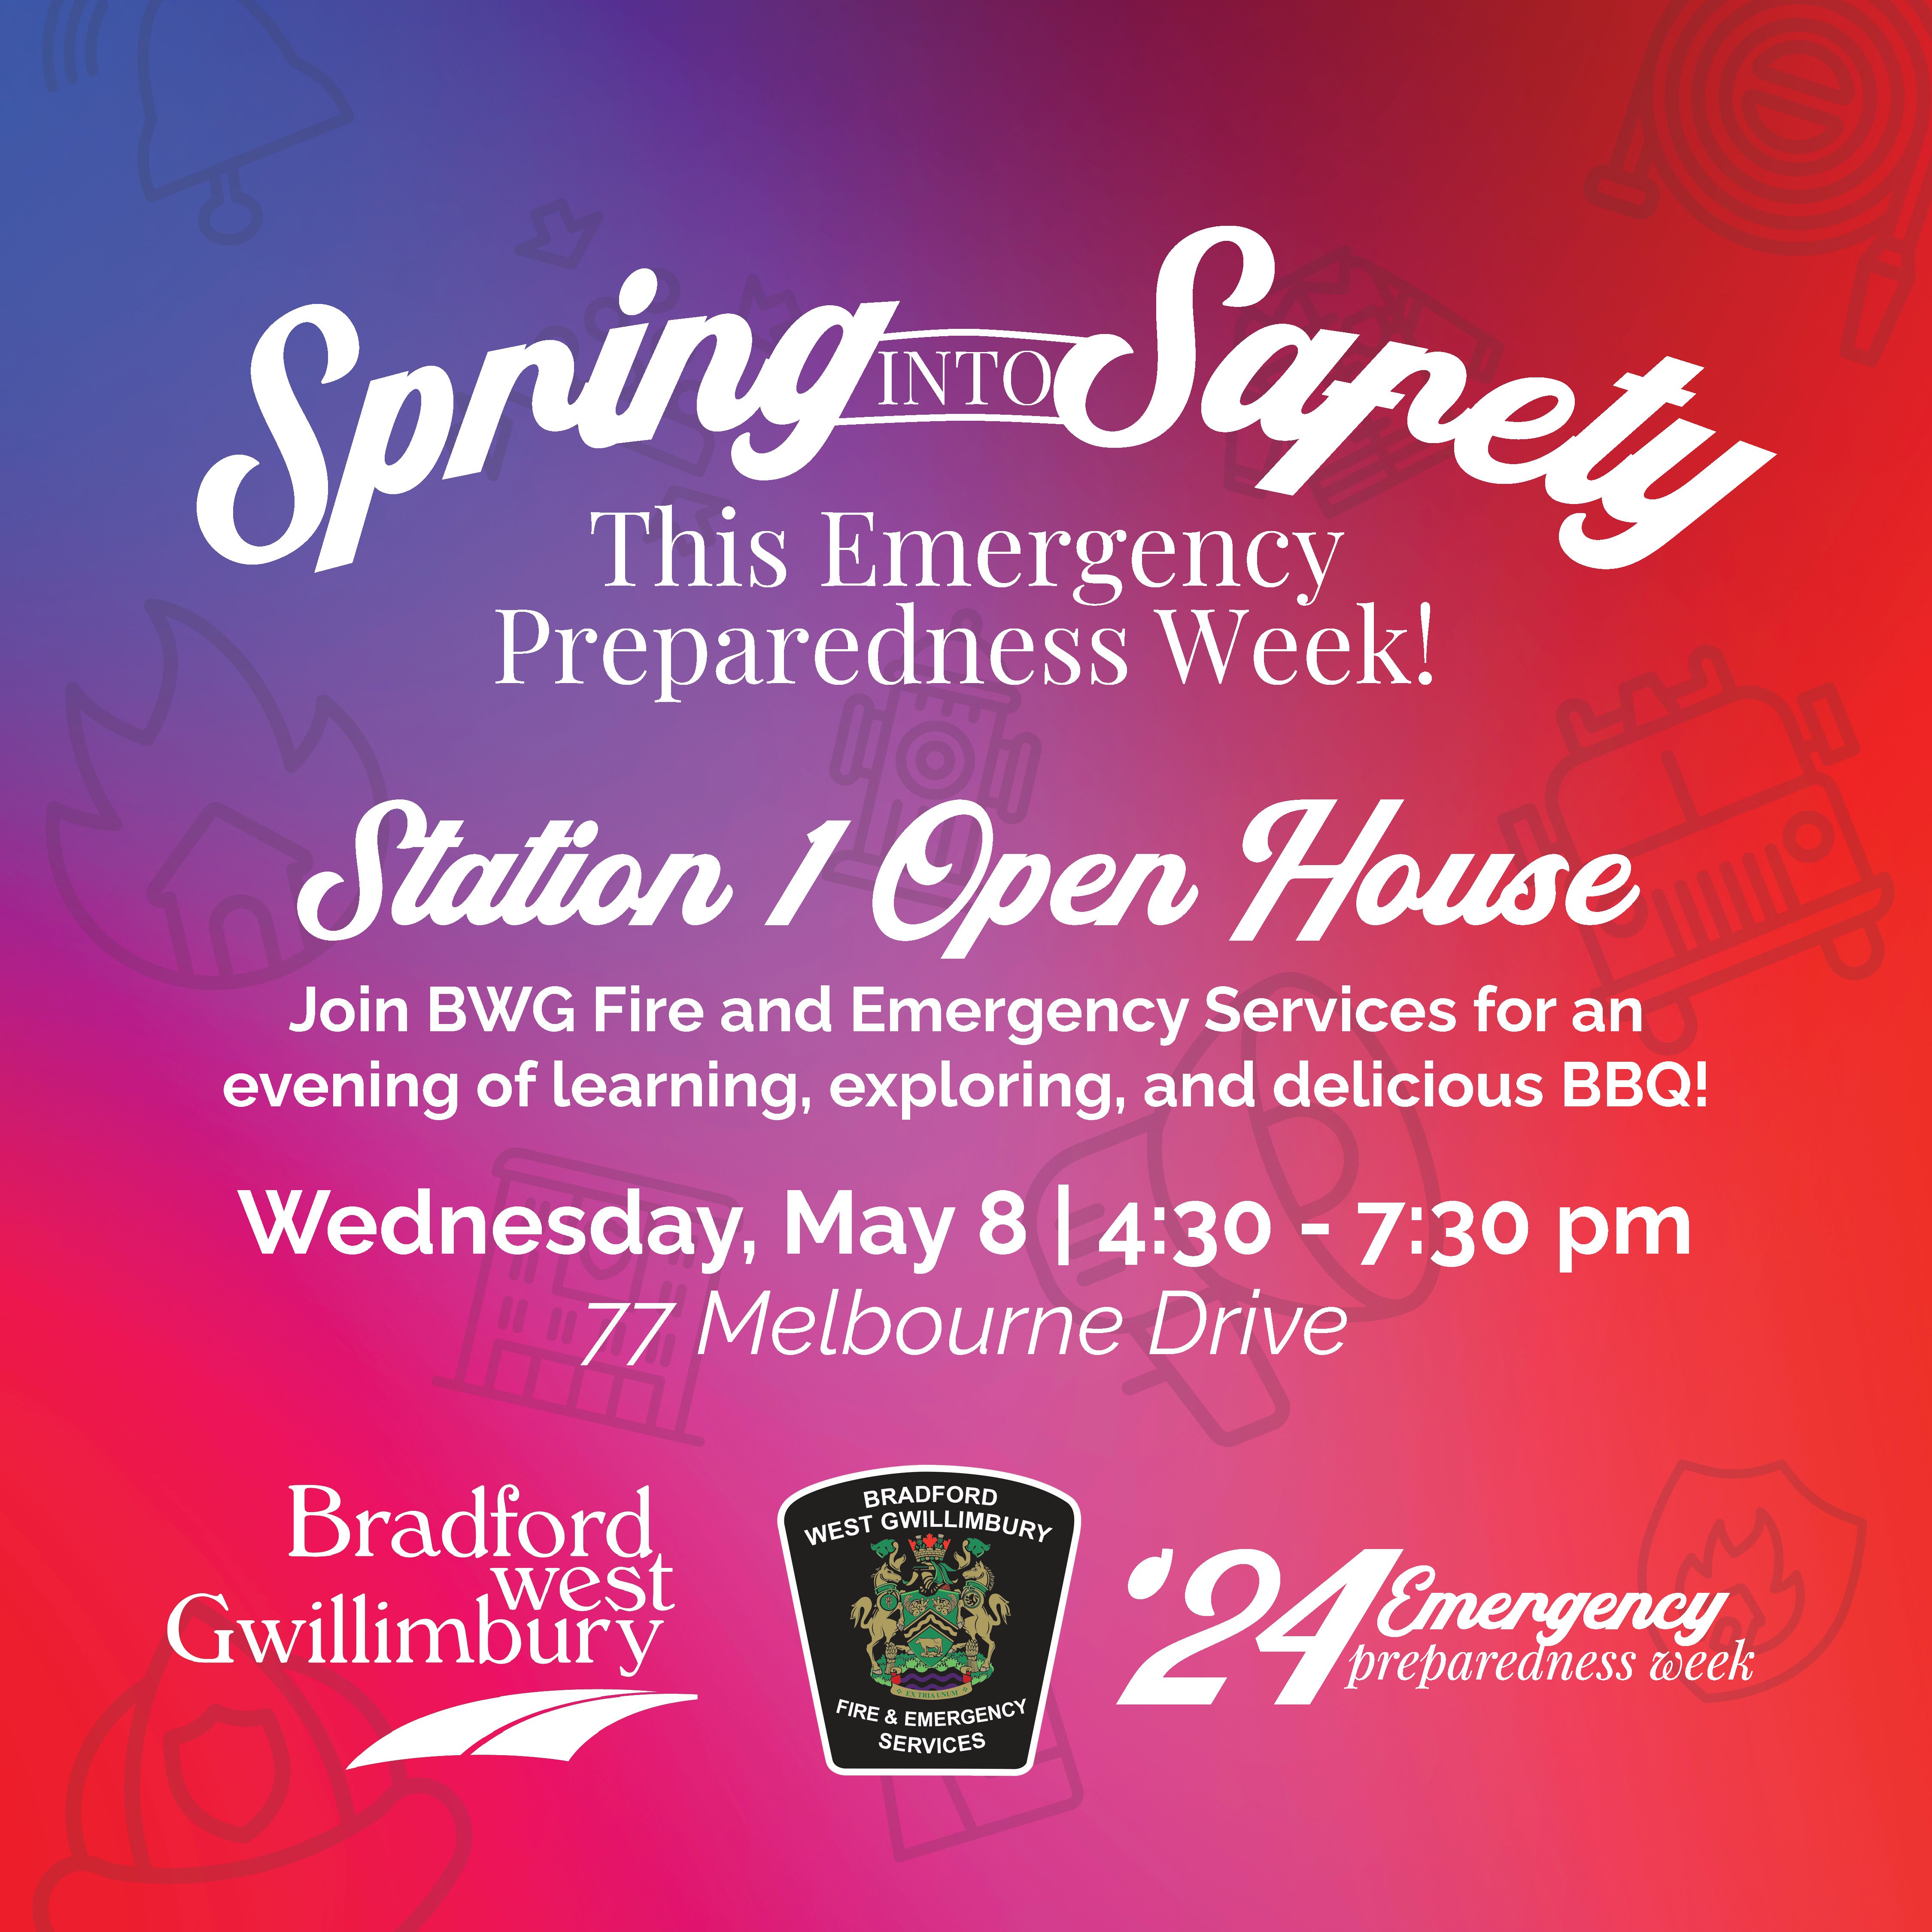 Instagram graphic promoting Station 1 open house event on May 8th, 2024